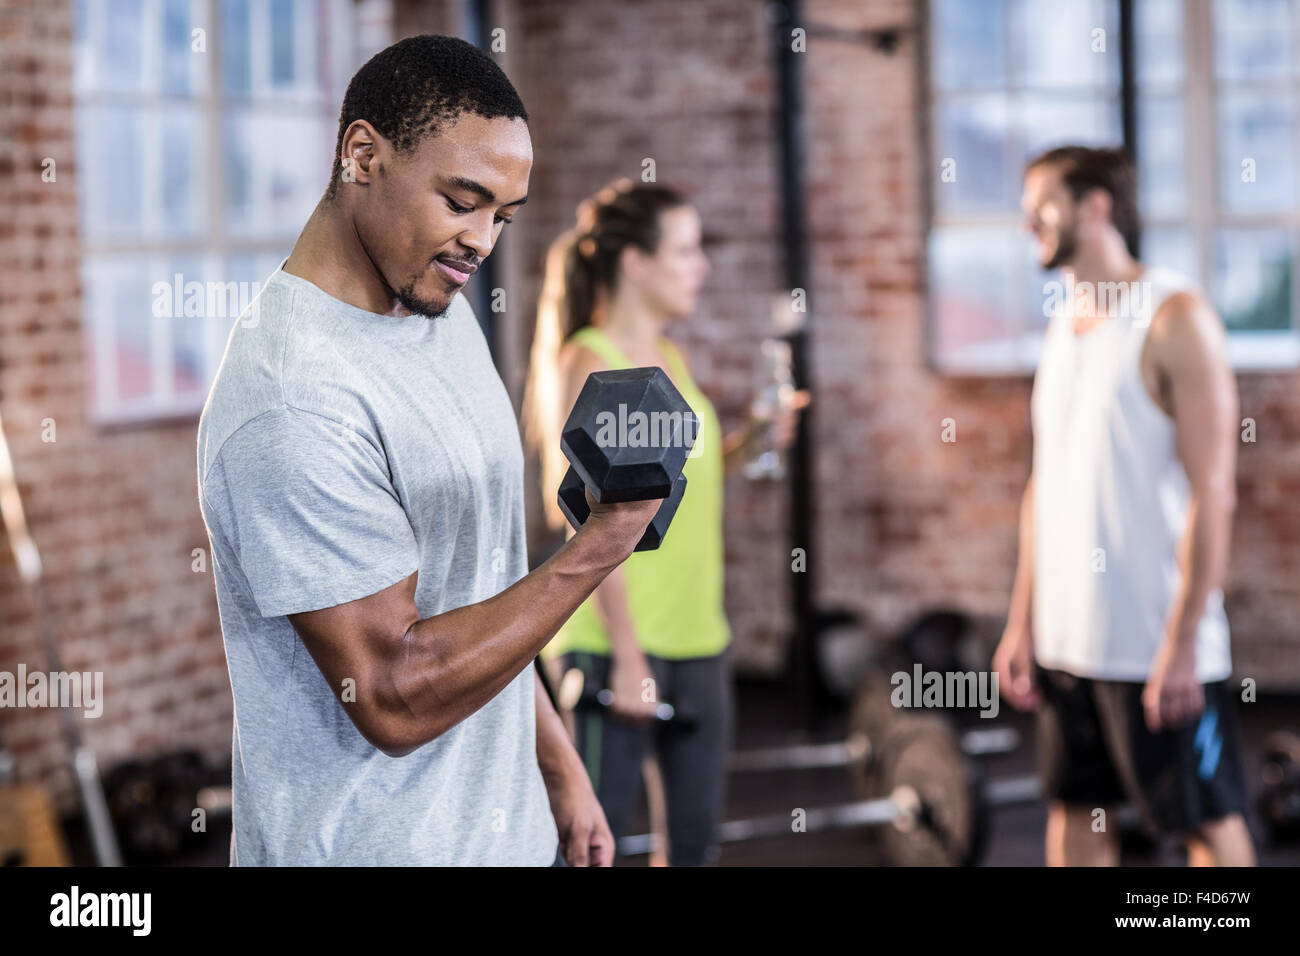 Muscular man exercising with dumbbell Banque D'Images